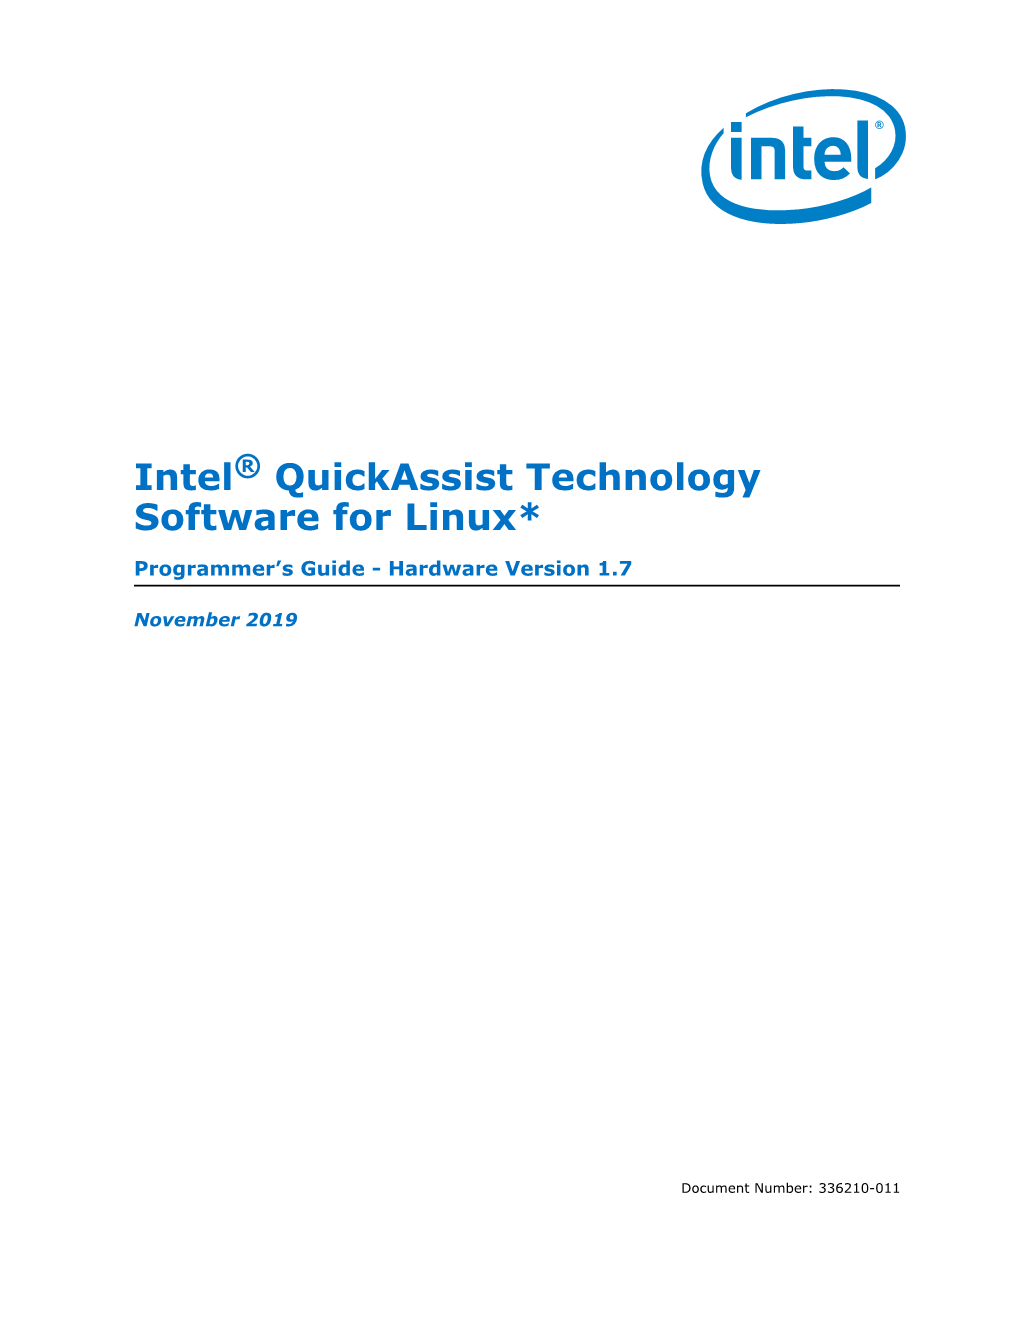 Intel Quickassist Technology Software for Linux*